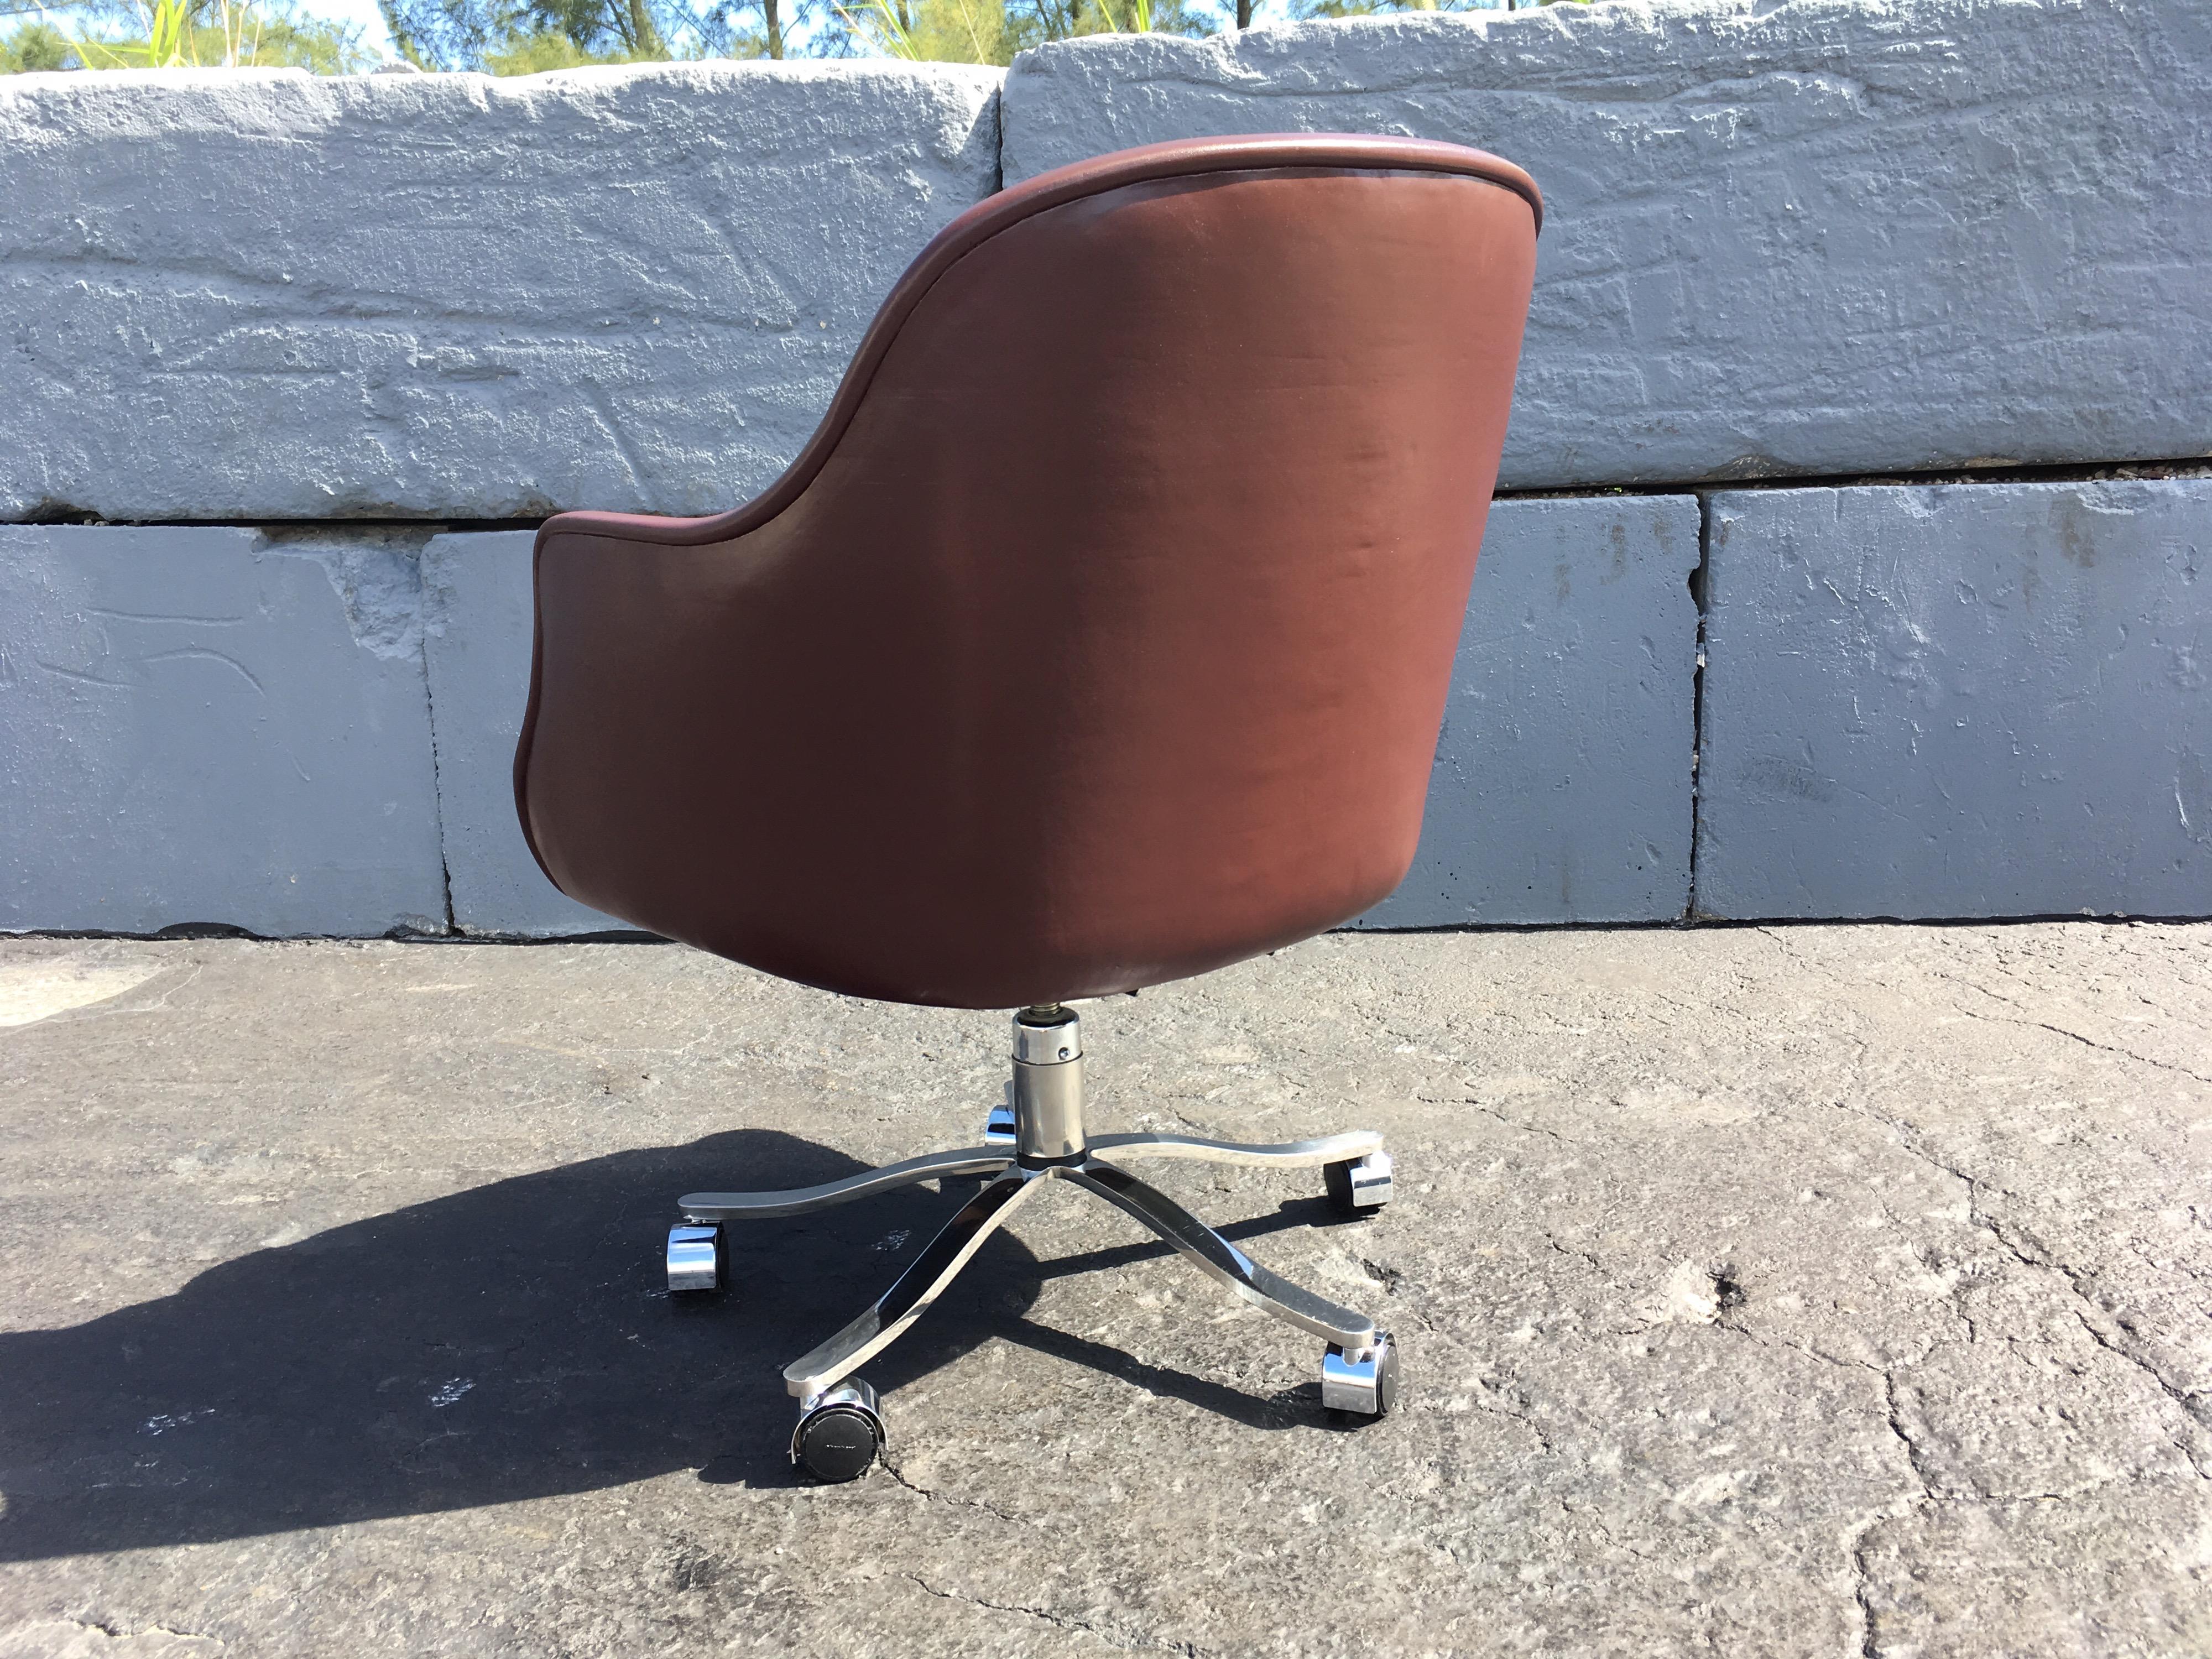 American Desk Chair by Nicos Zographos, Leather and Stainless Steel Base